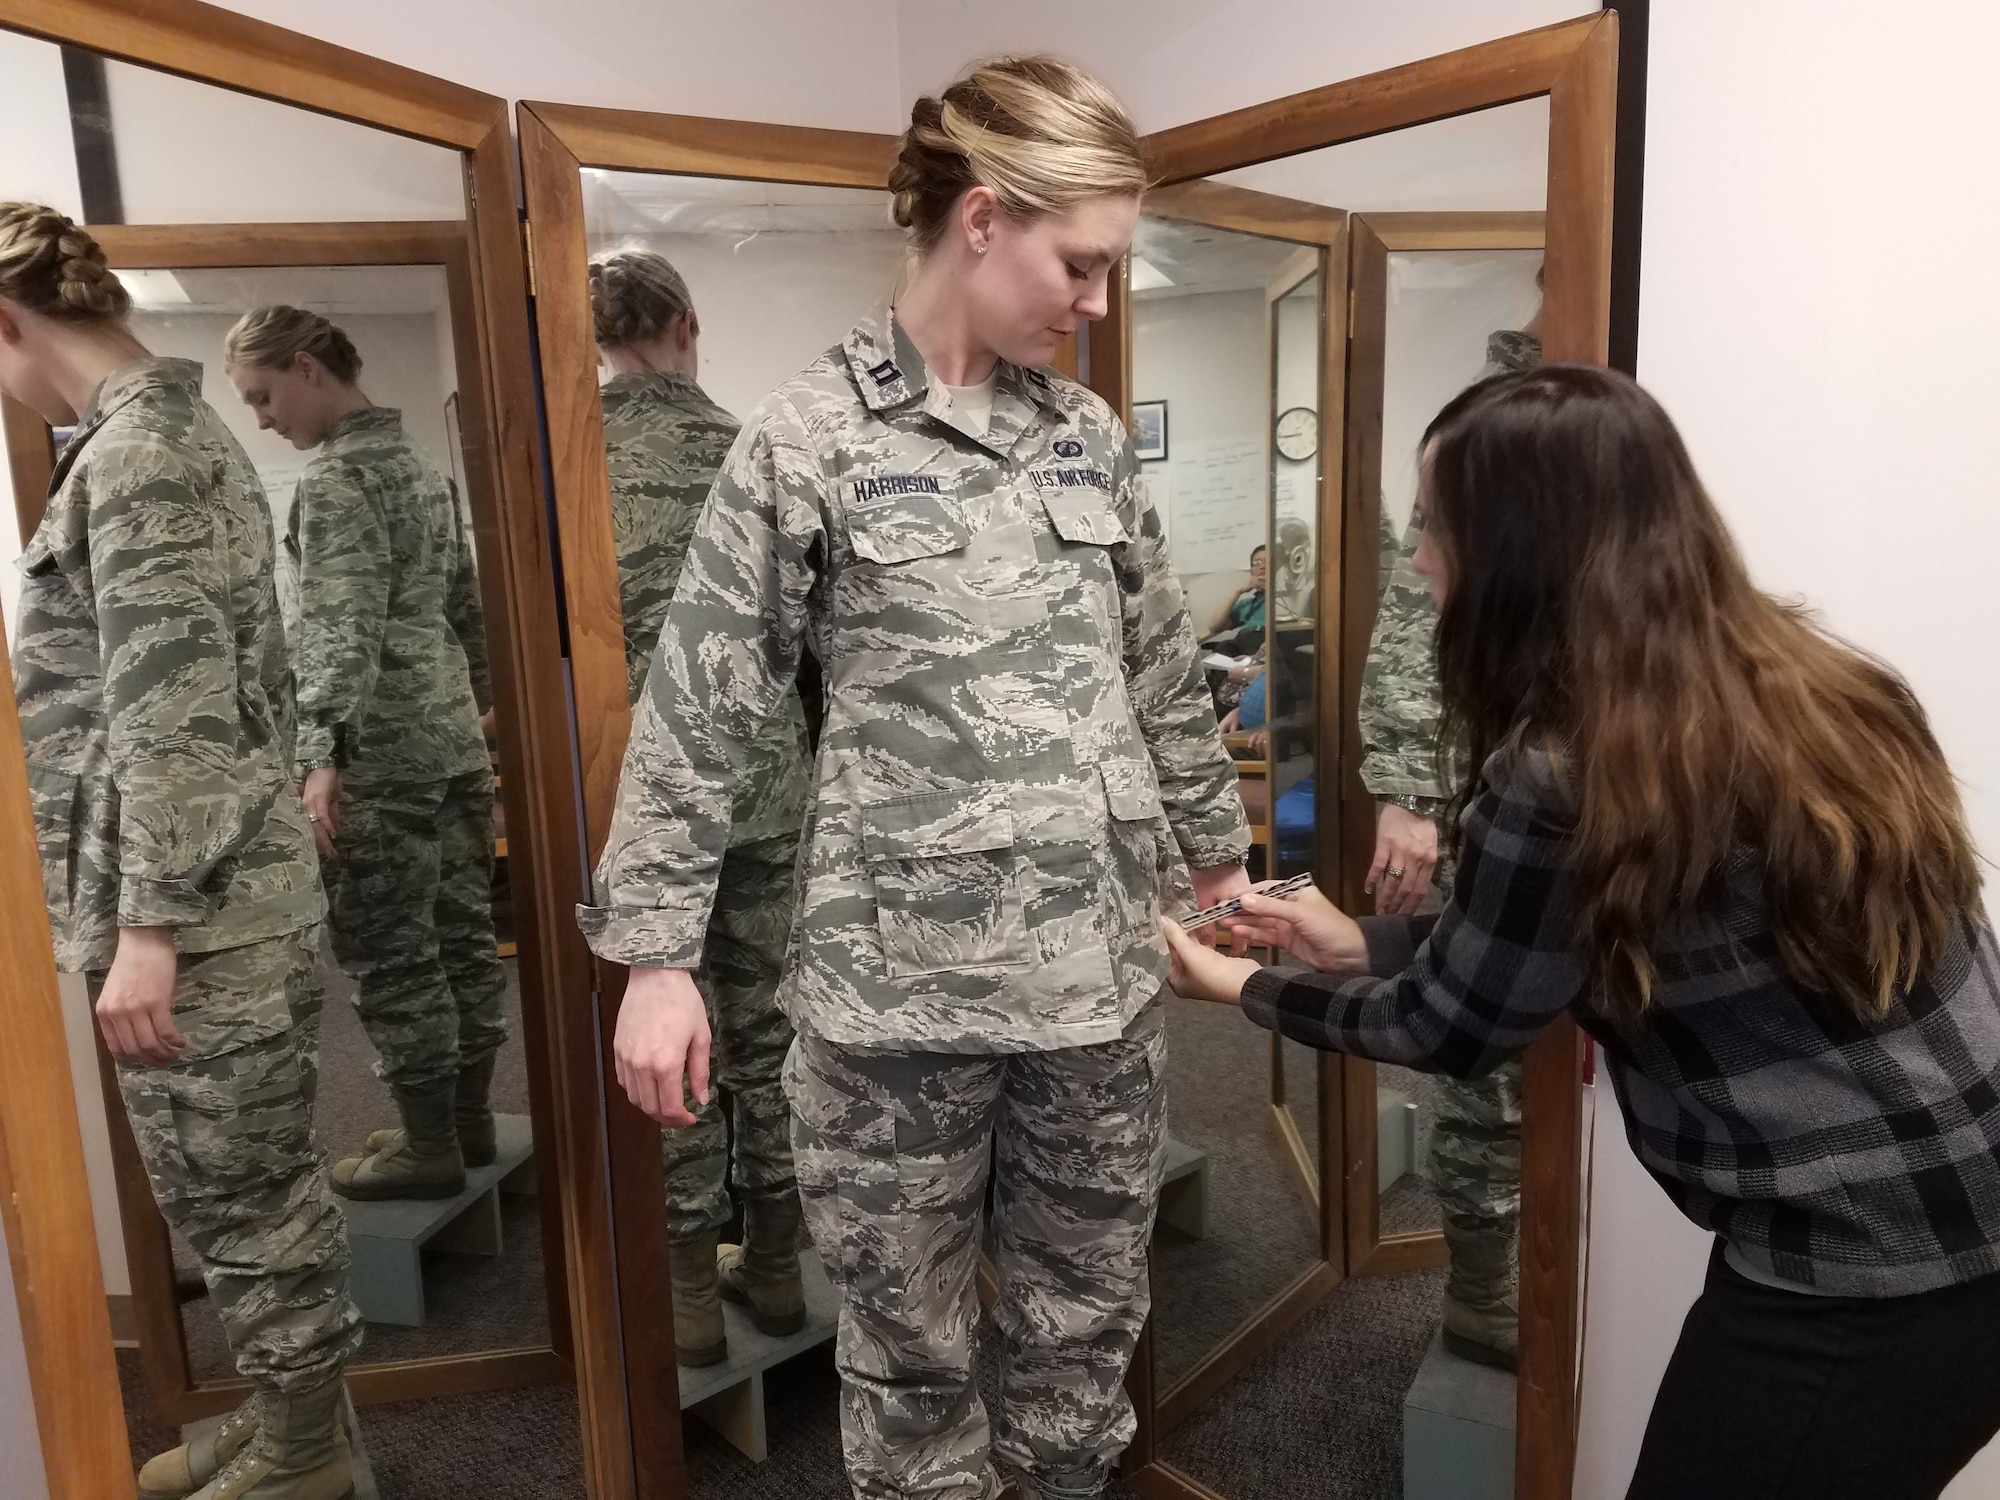 Stacey Butler (right) a clothing designer with the Air Force Life Cycle Management Center's Air Force Uniform Office, measures Capt. Taylor Harrison's maternity Airman Battle Uniform. The new uniforms were designed and developed by the office and are available to pregnant Airmen around the world.